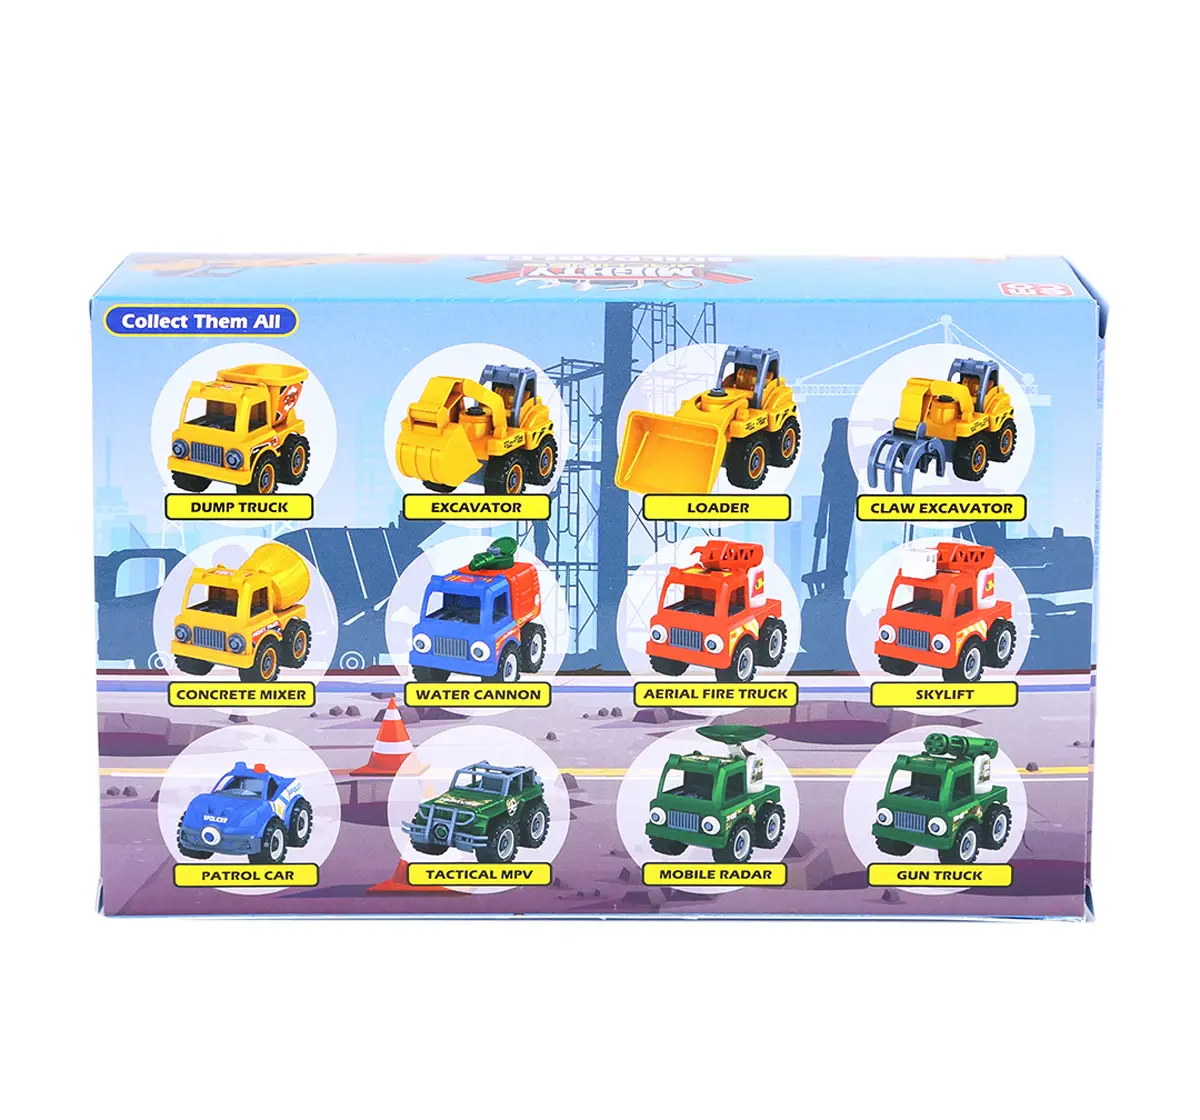 Mighty Machines Loader Construction Vechile for kids 3Y+, Multicolour